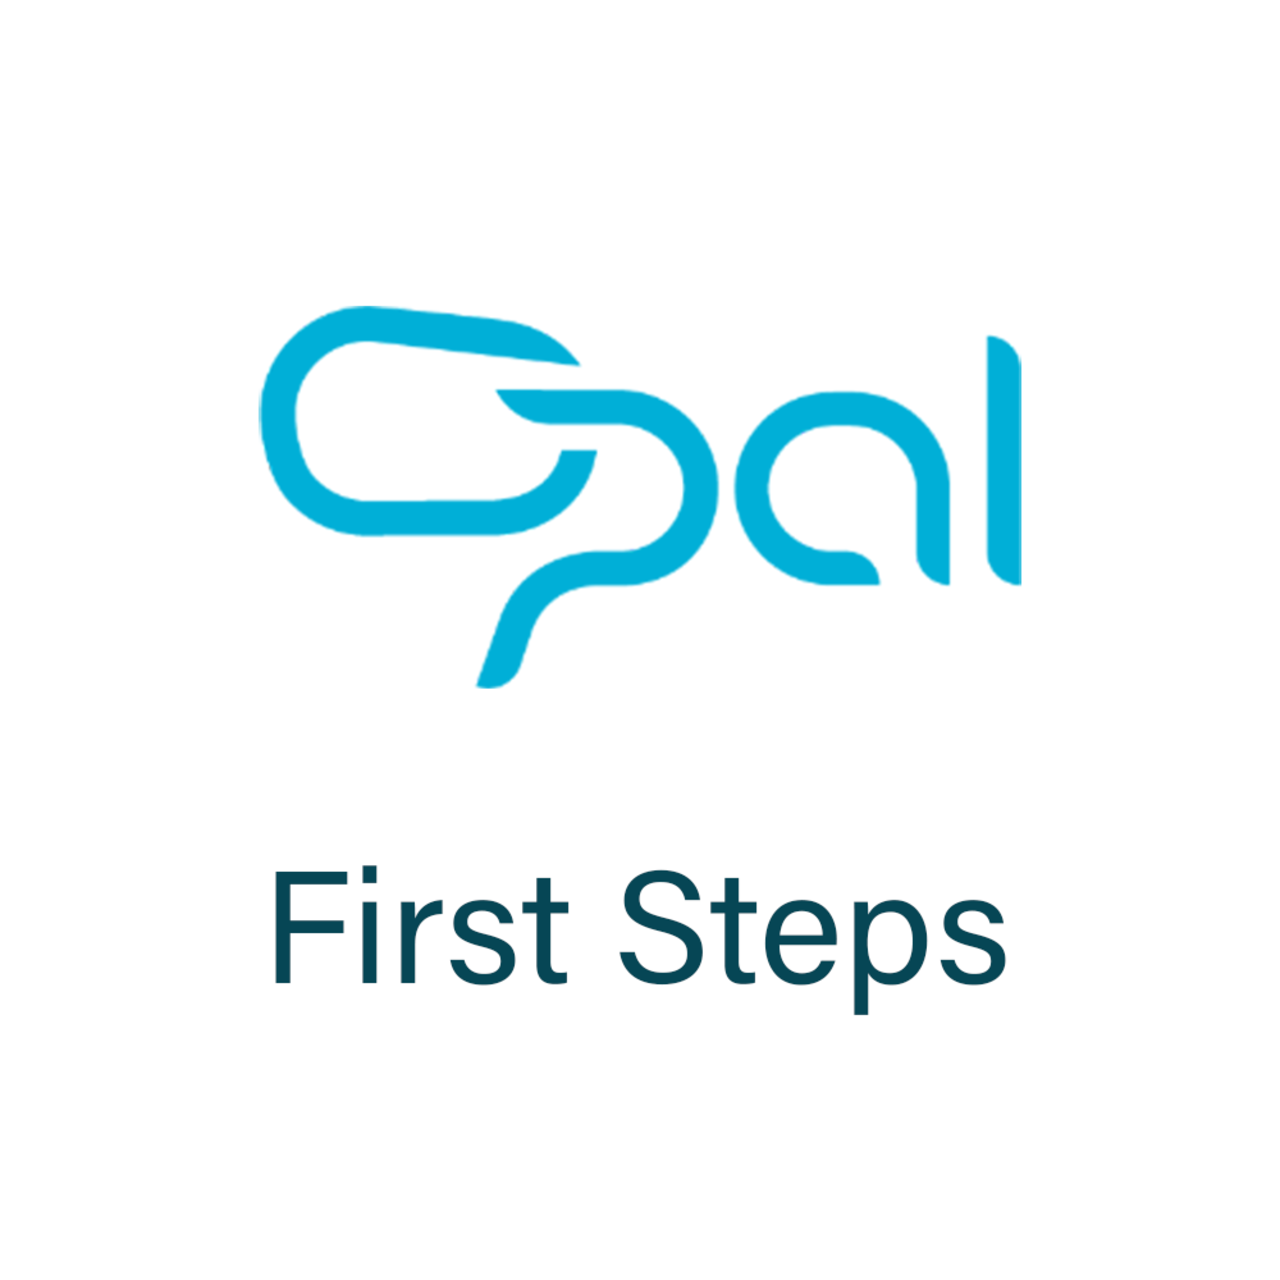 The Opal symbol with the words "First Steps" beneath.